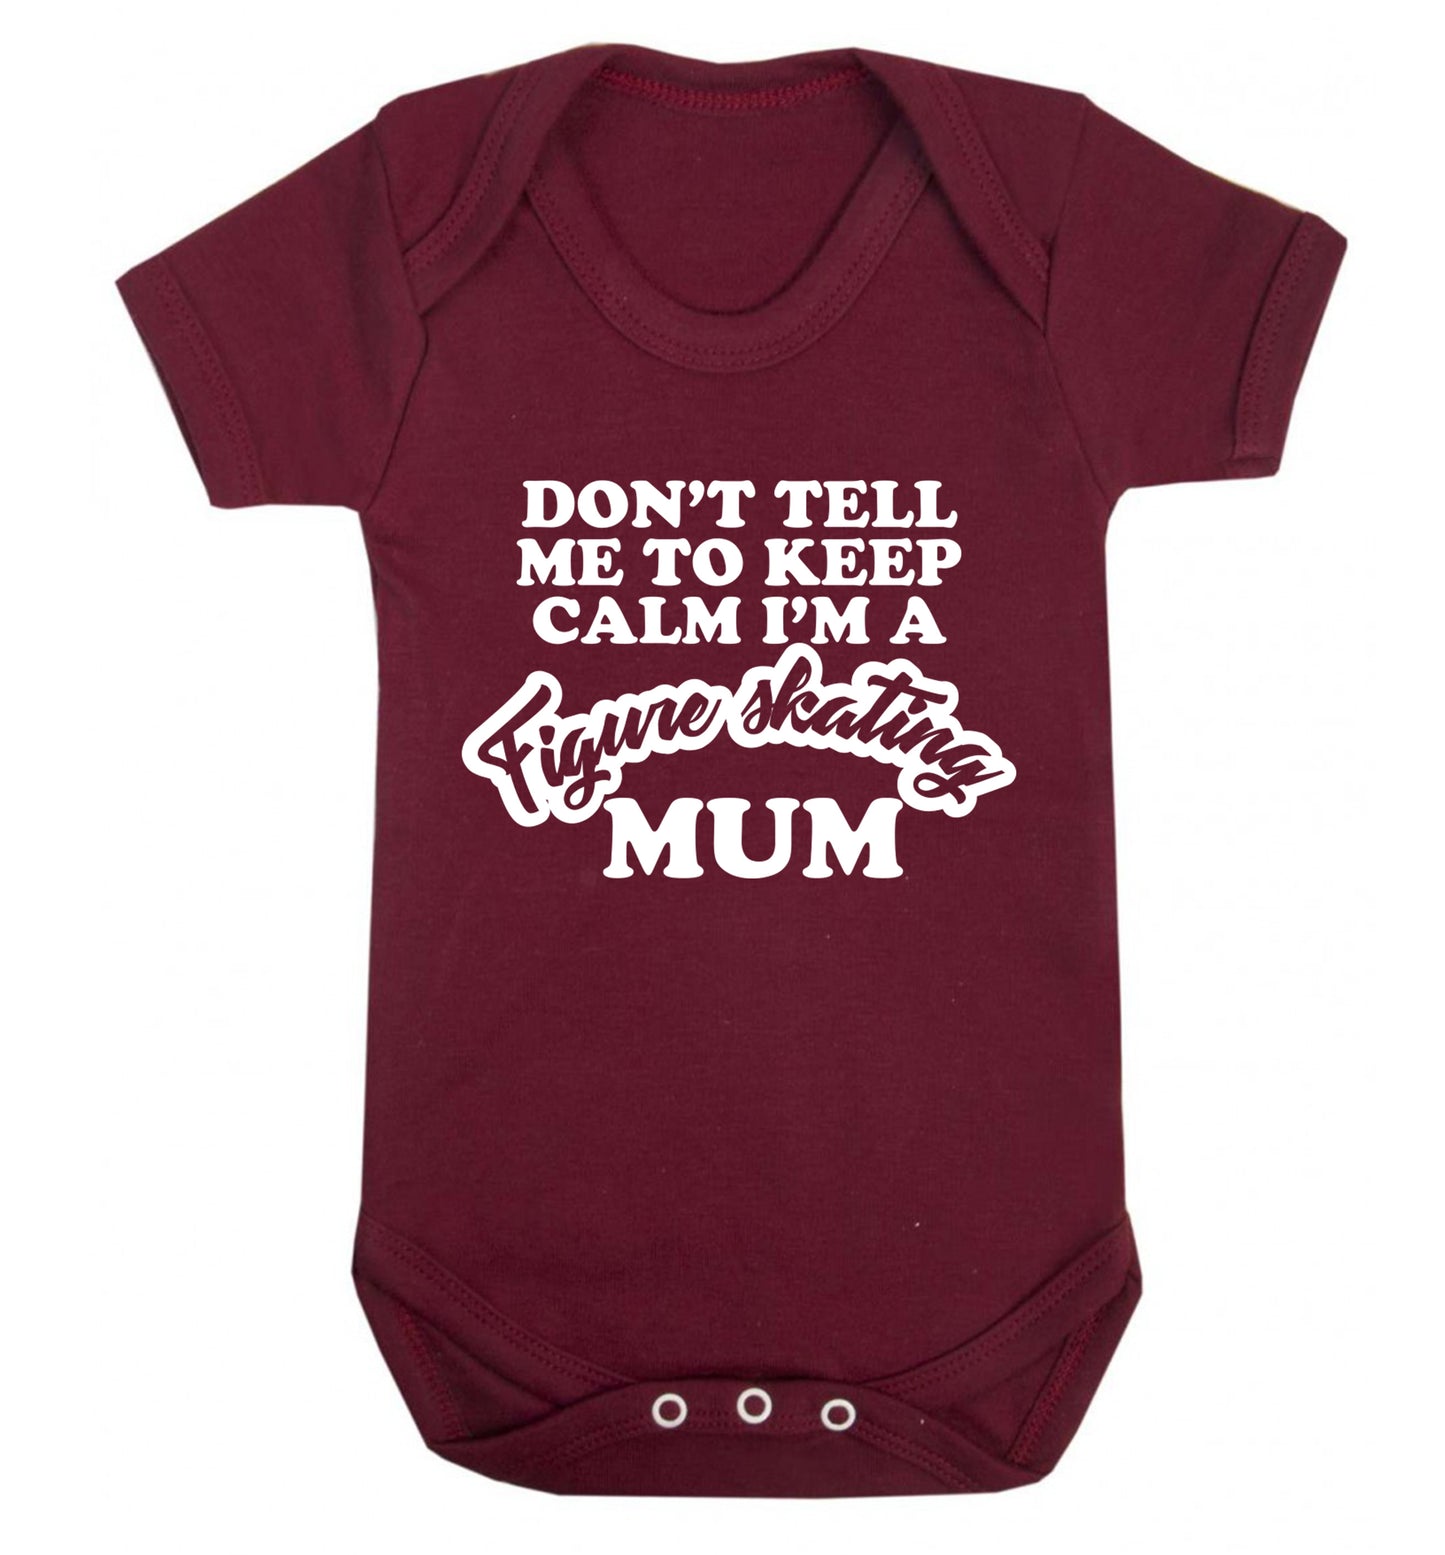 Don't tell me to keep calm I'm a figure skating mum Baby Vest maroon 18-24 months